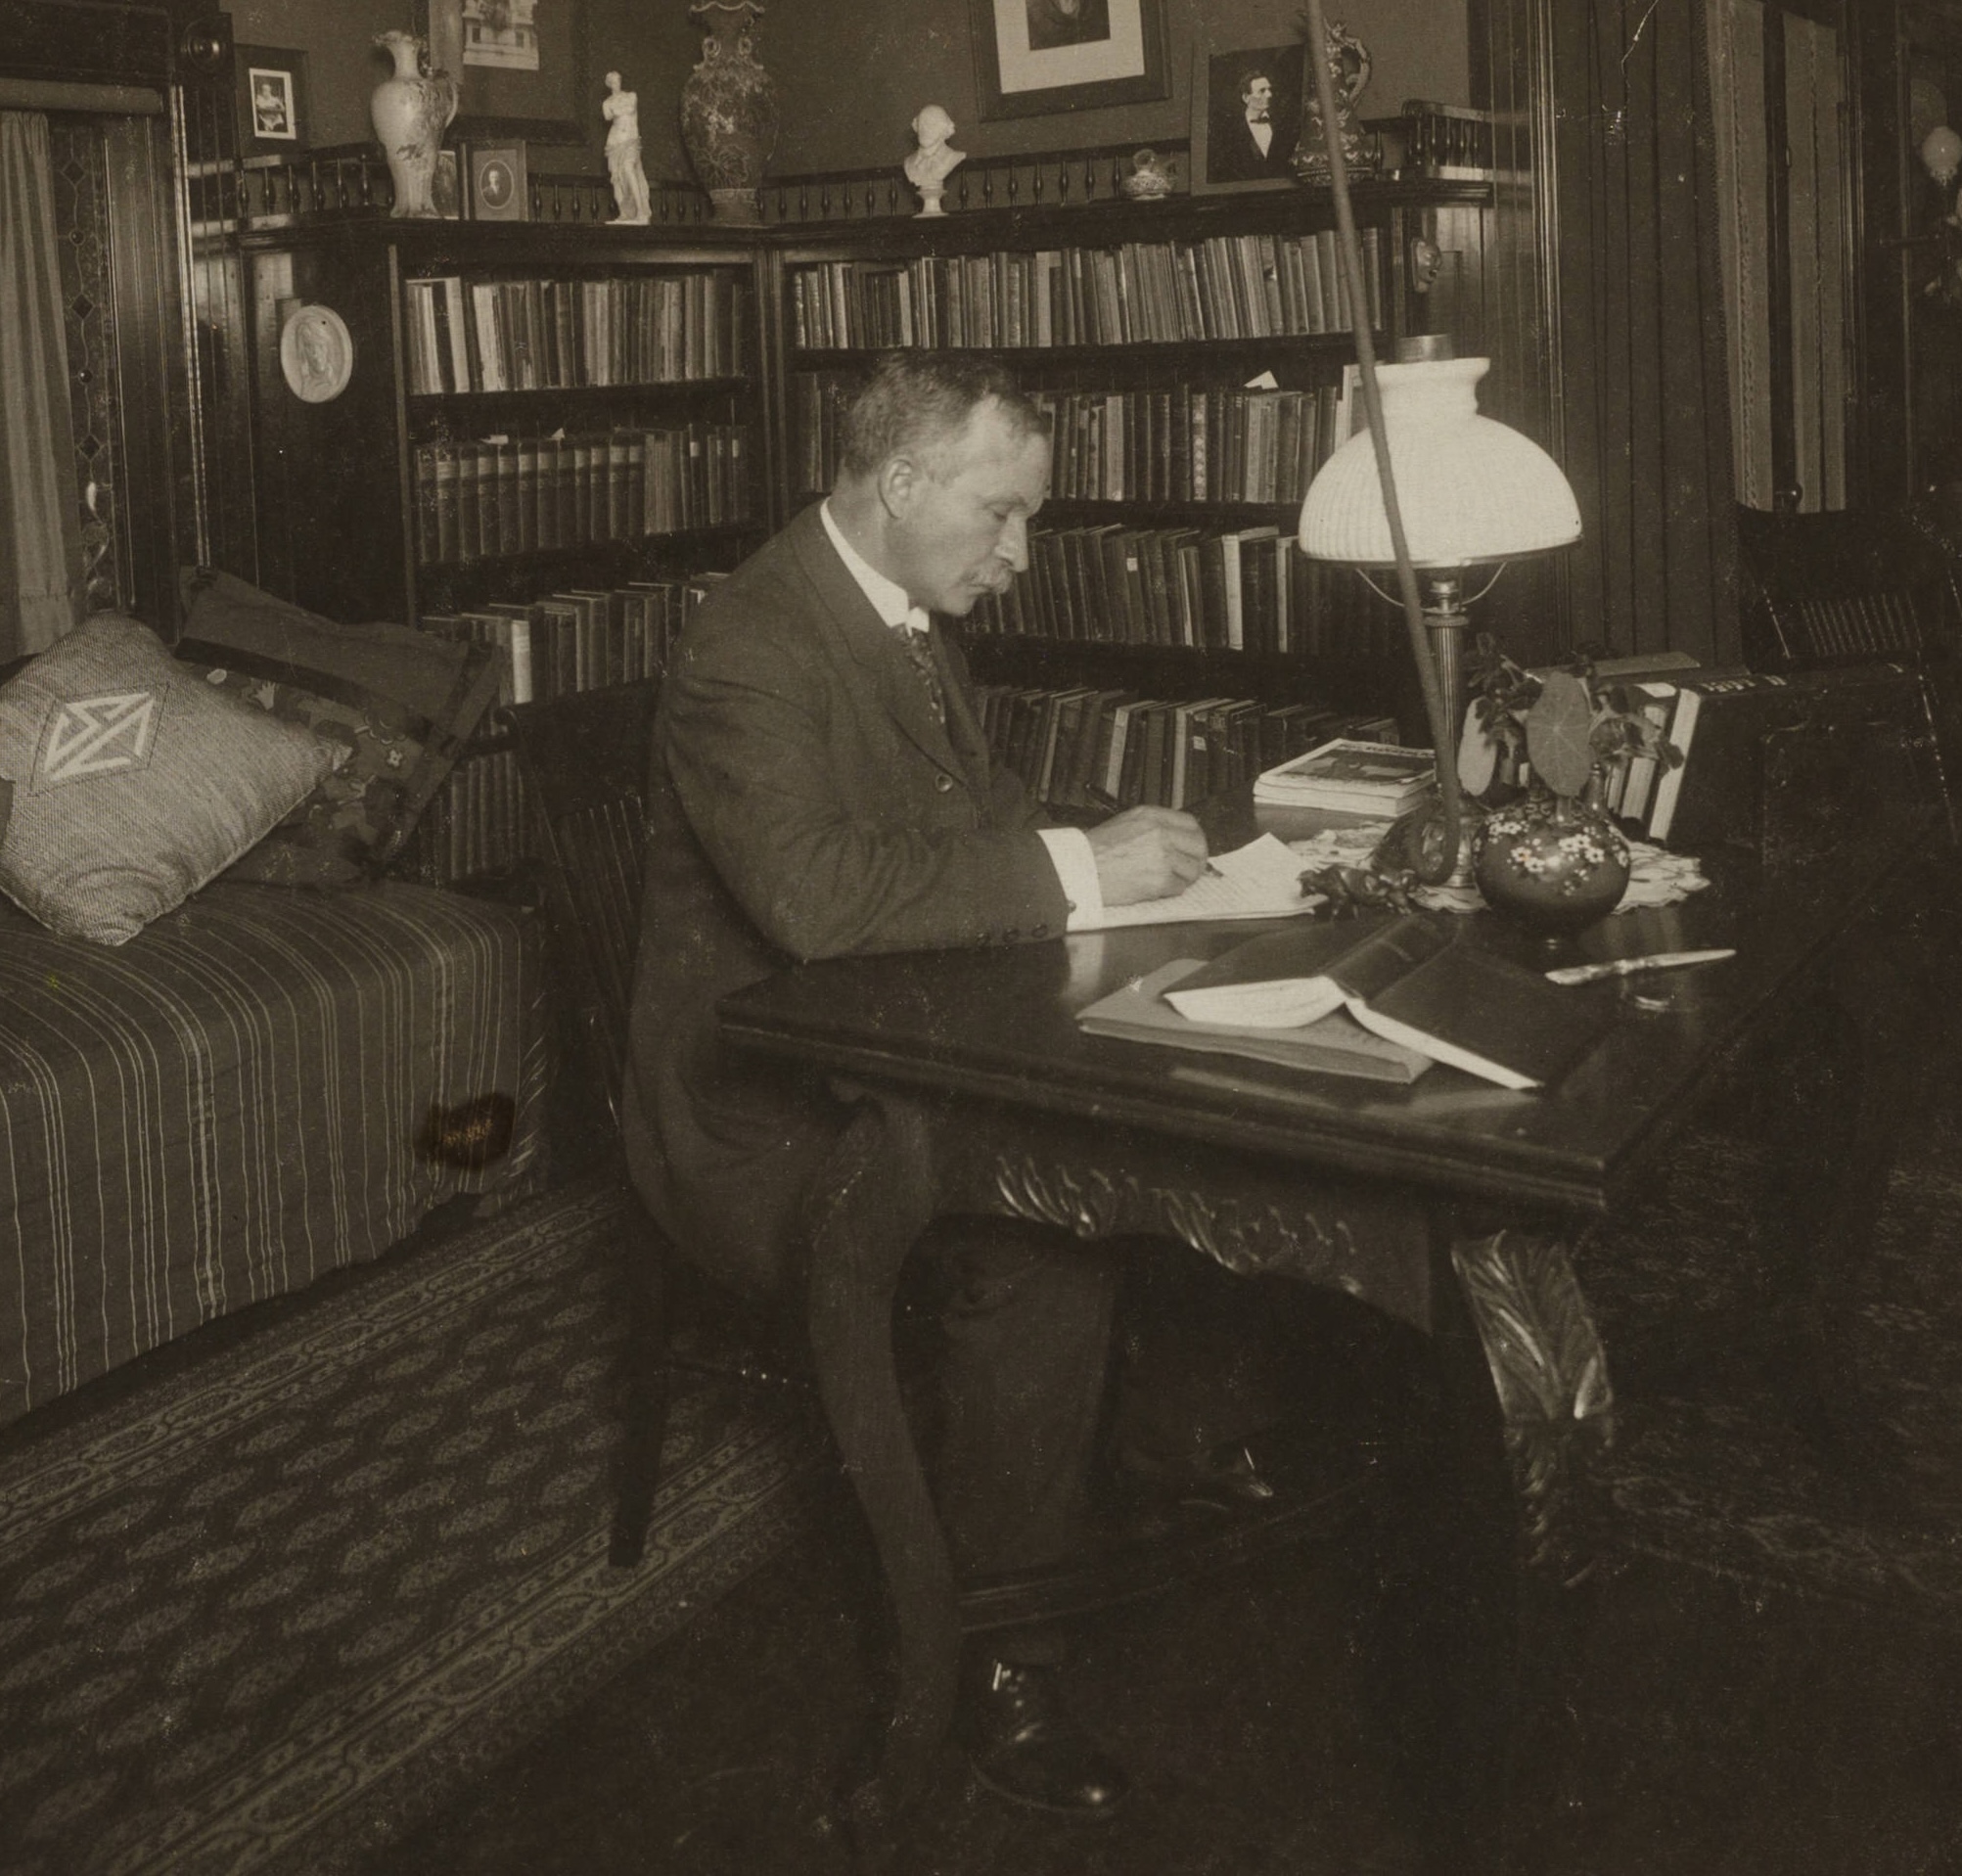 Detail from Photograph of C.W. Chesnutt in his library, public domain